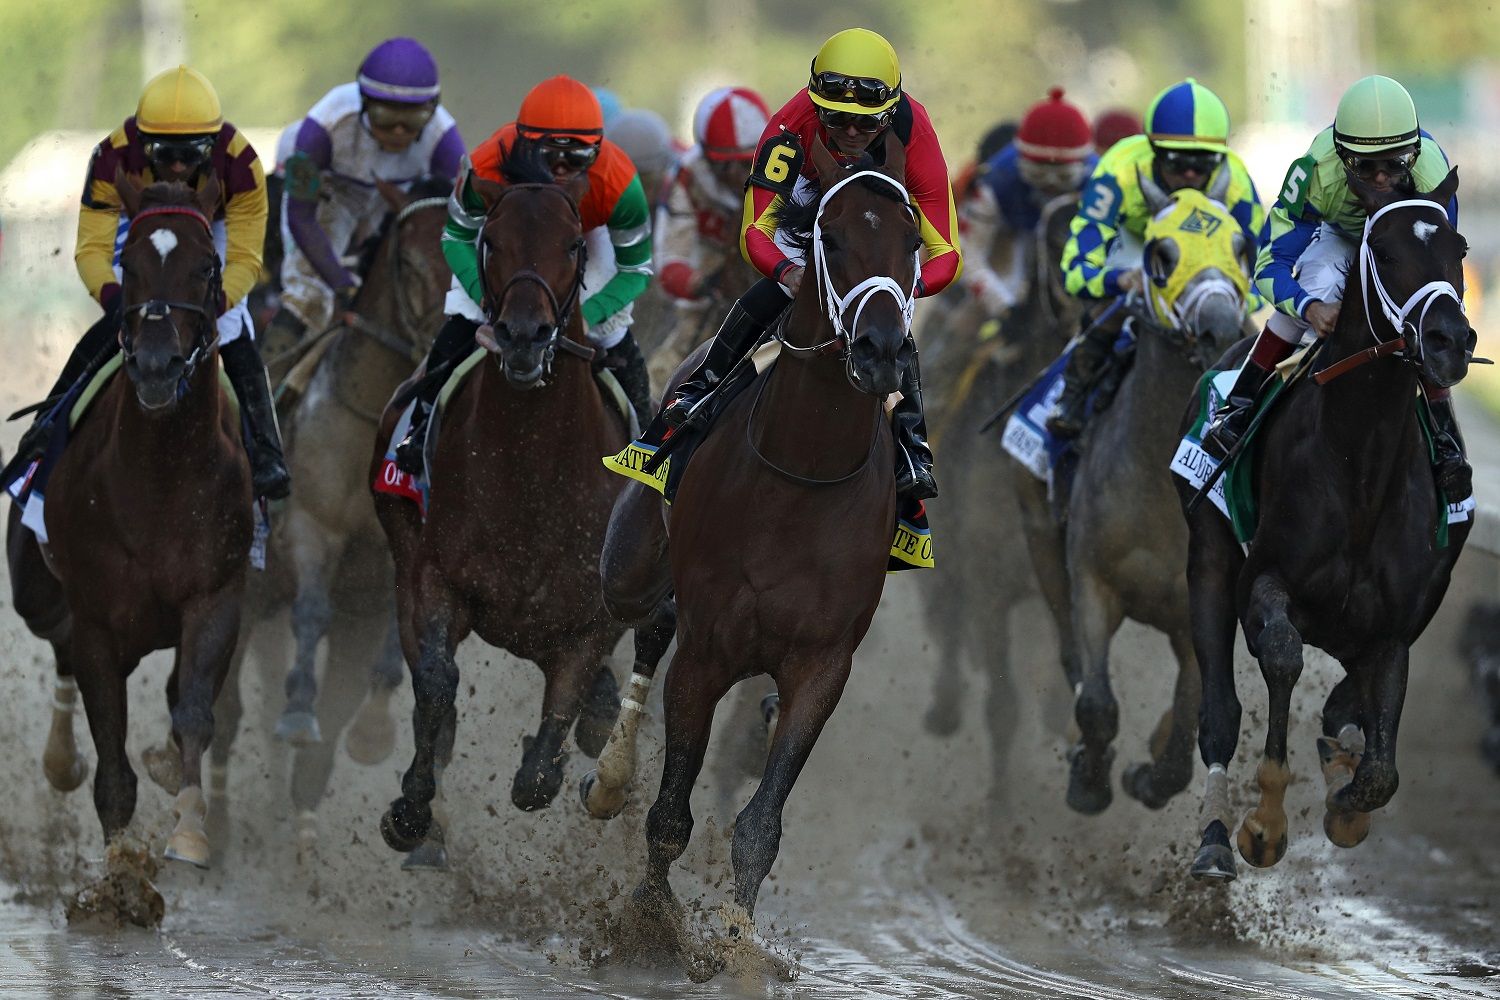 LOUISVILLE, KY - MAY 06: The field heads into the first turn during the 143rd running of the Kentucky Derby at Churchill Downs on May 6, 2017 in Louisville, Kentucky. (Photo by Patrick Smith/Getty Images)